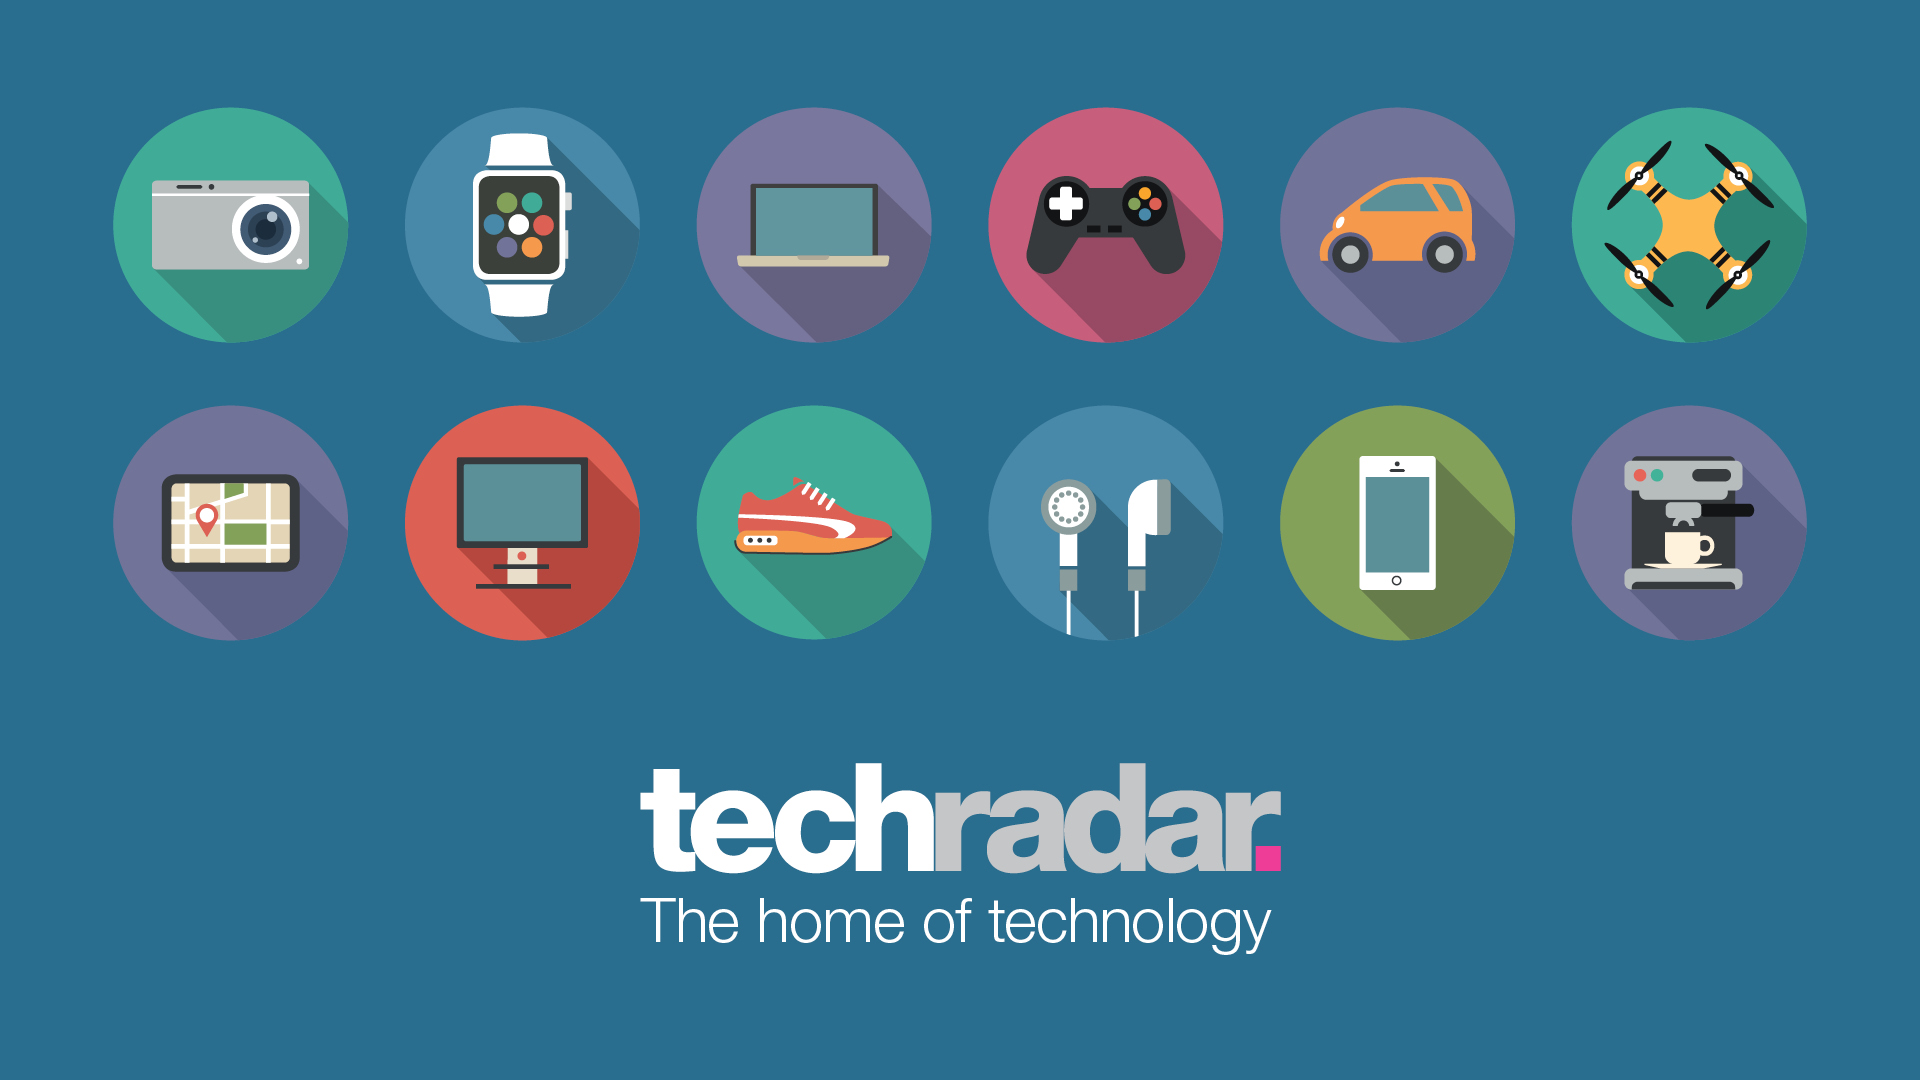 Related image of Techradar The Source For Tech Buying Advice.